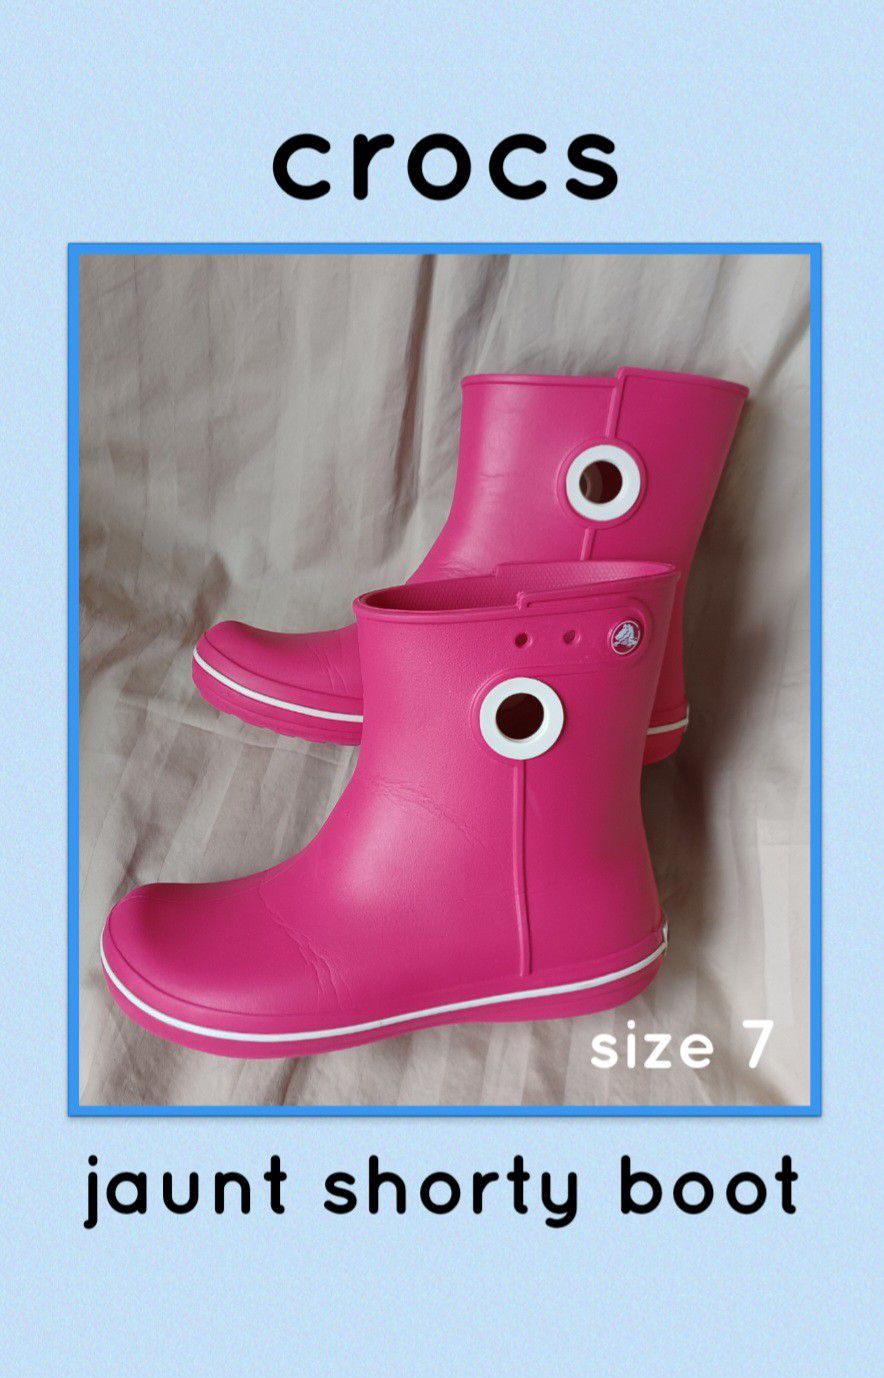 har Tentacle Whirlpool Women's CROCS JAUNT SHORTY Boot; Size 7 for Sale in Lake Placid, FL -  OfferUp